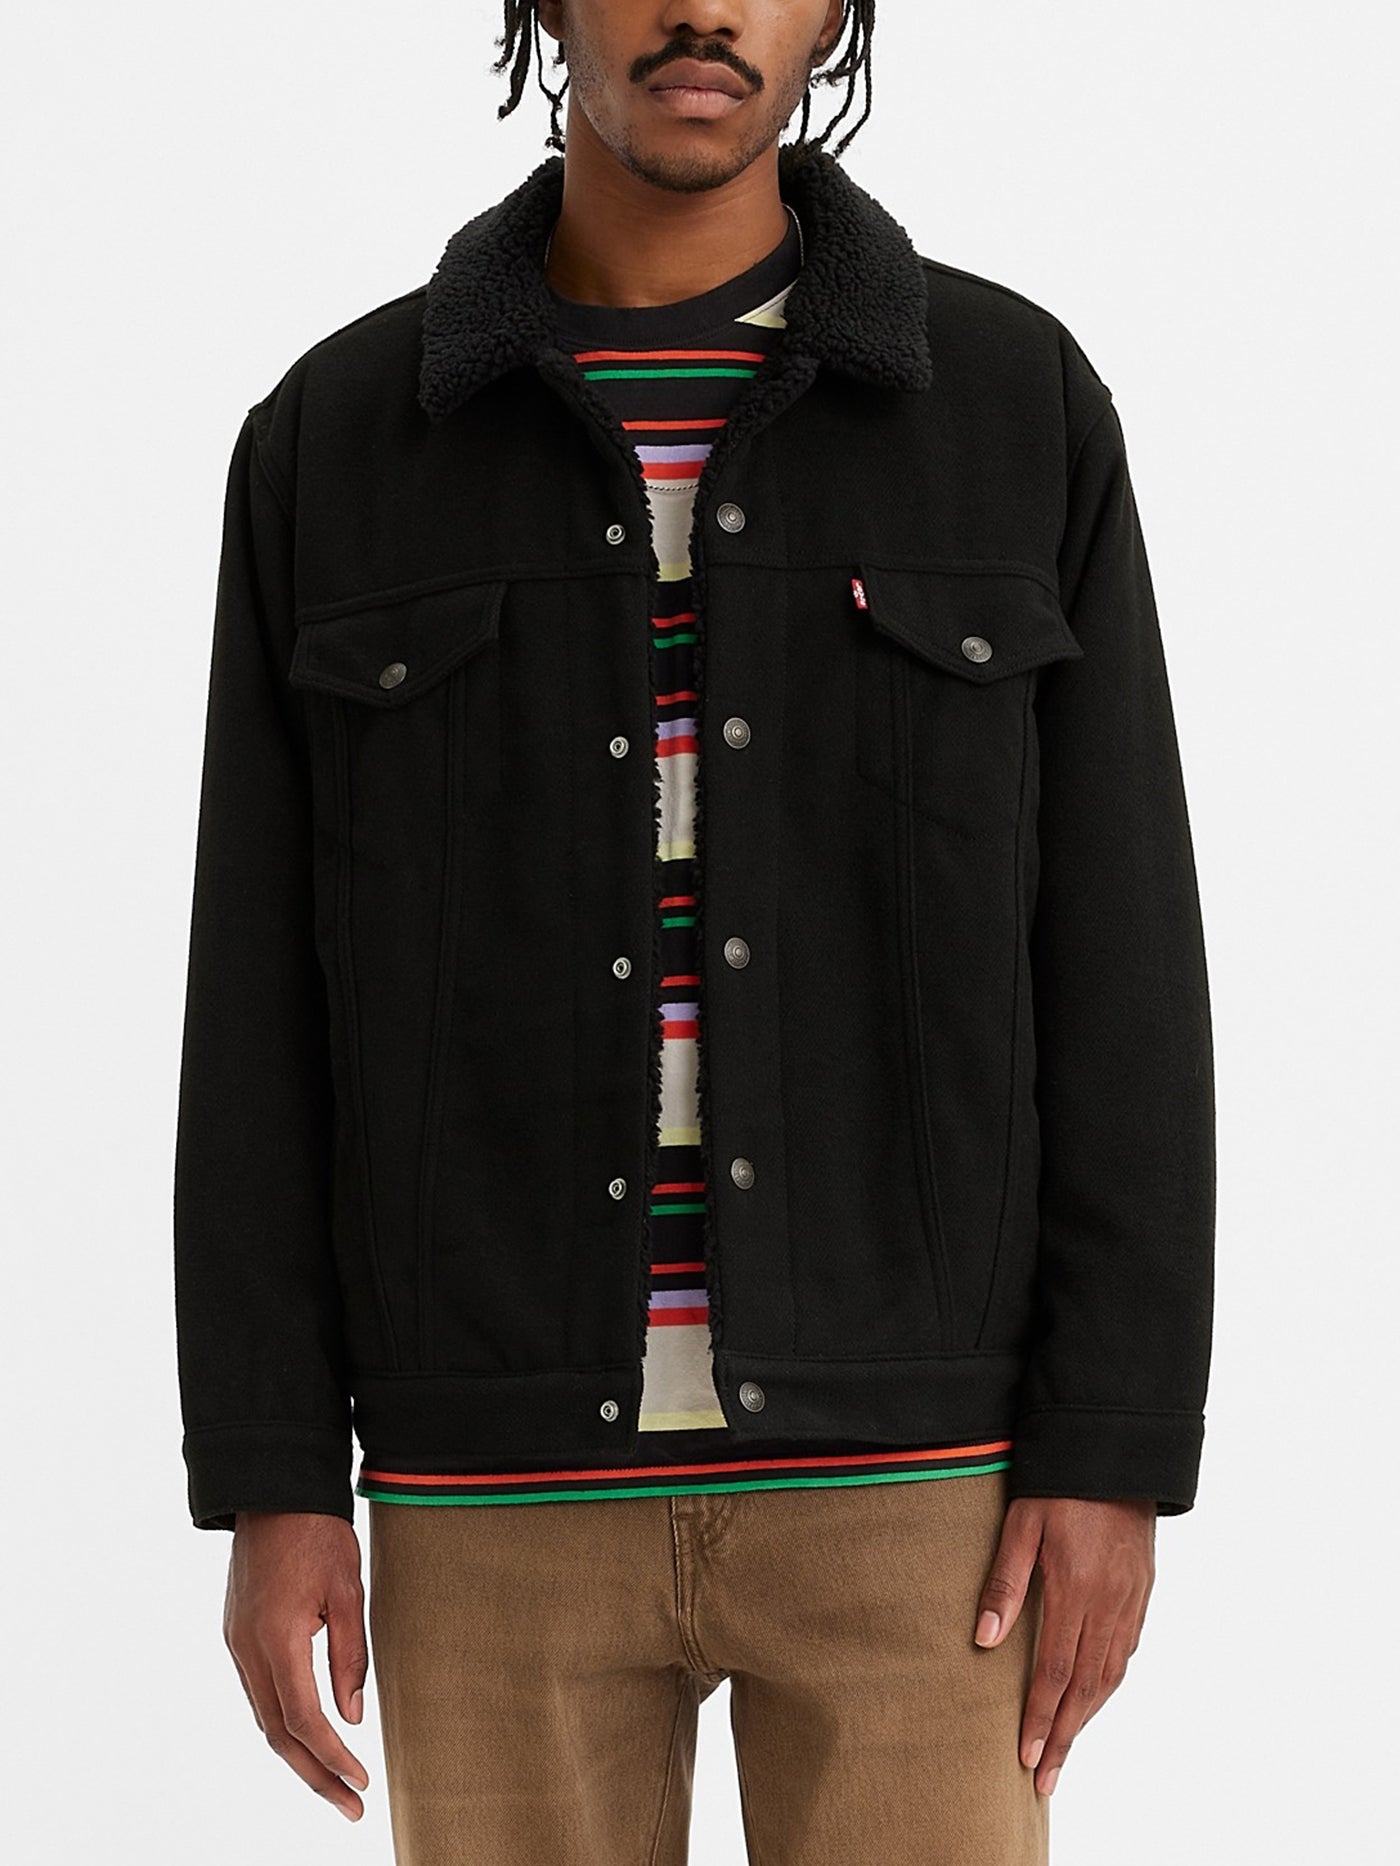 Relaxed Fit Trucker Jacket - Black